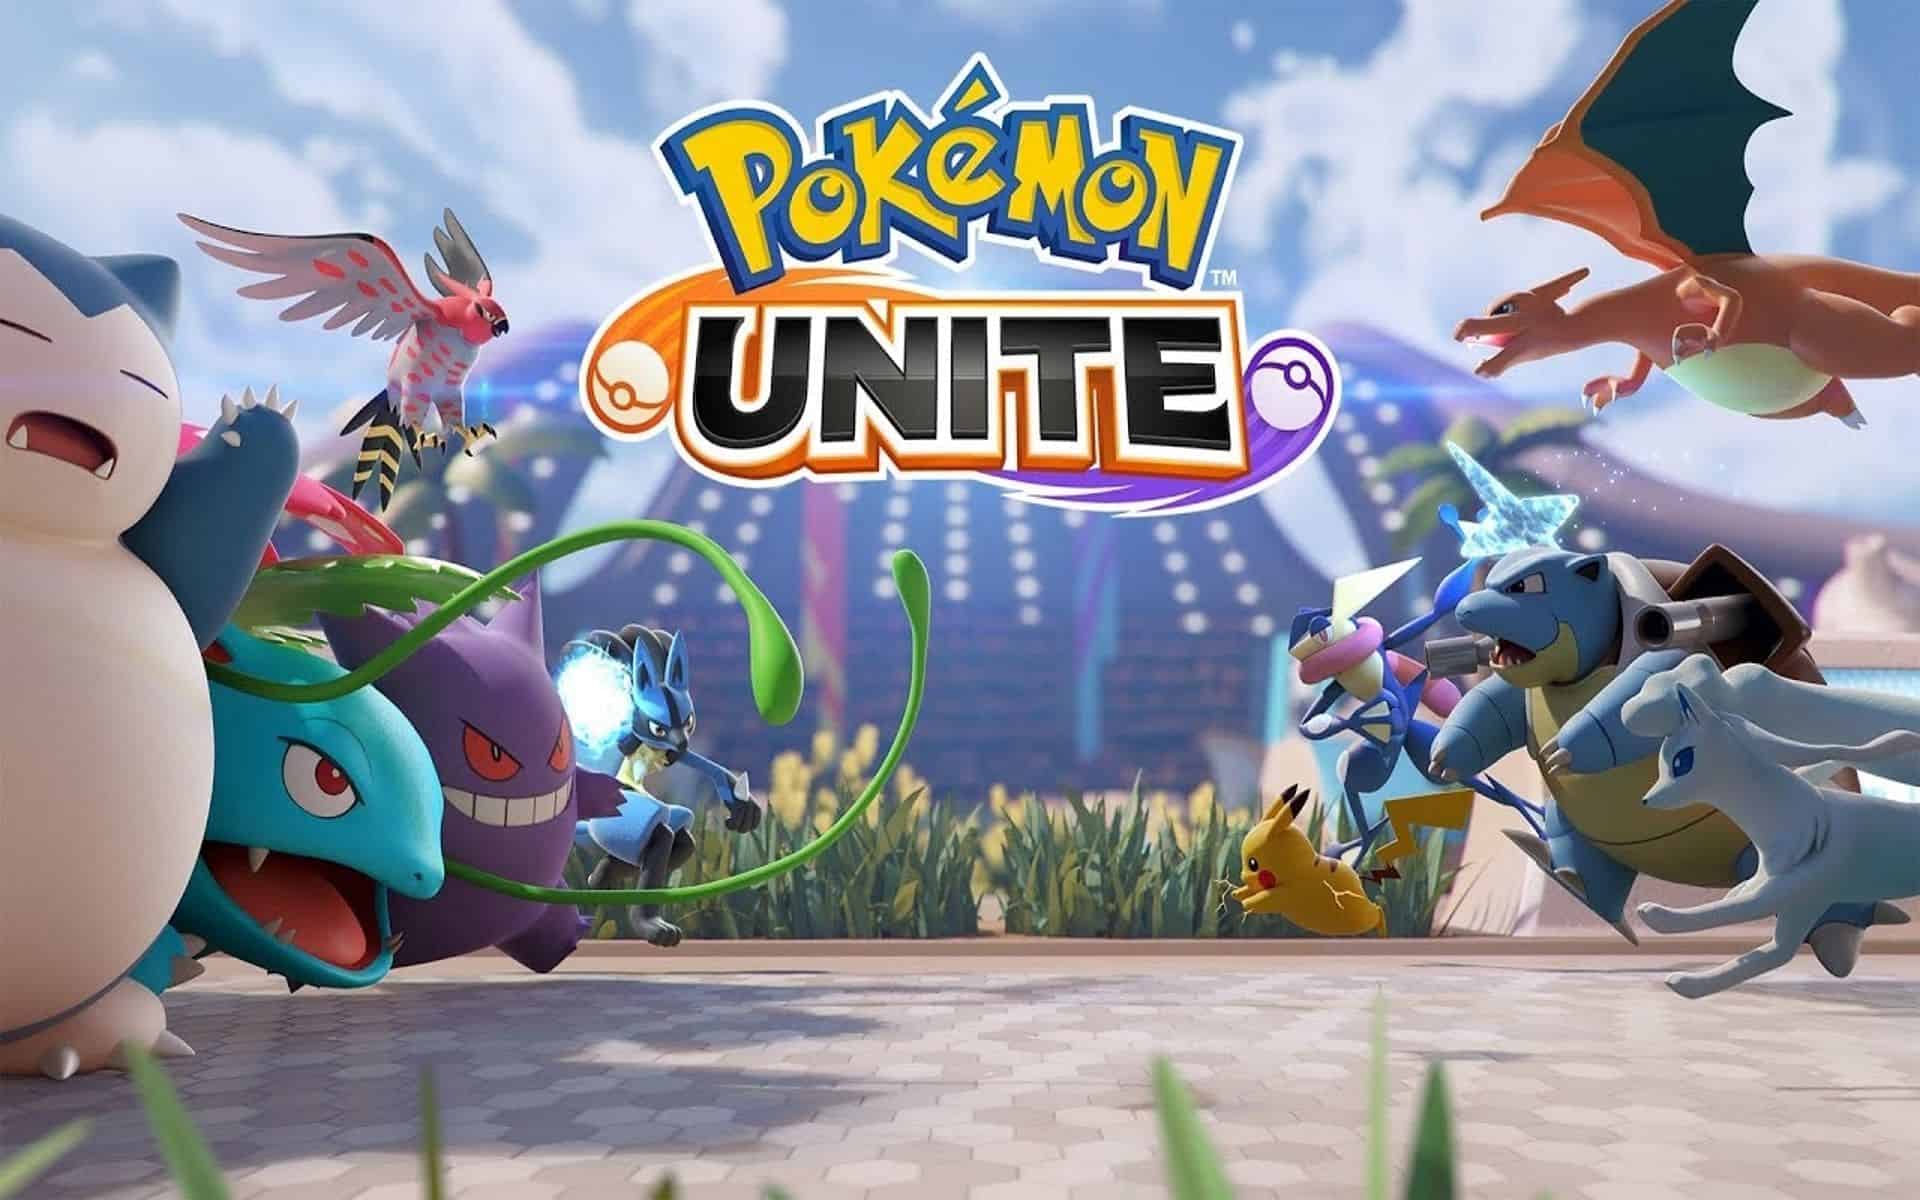 pokemon-unite-android-ios The Best Games of 2021 for Android, according to Google Play